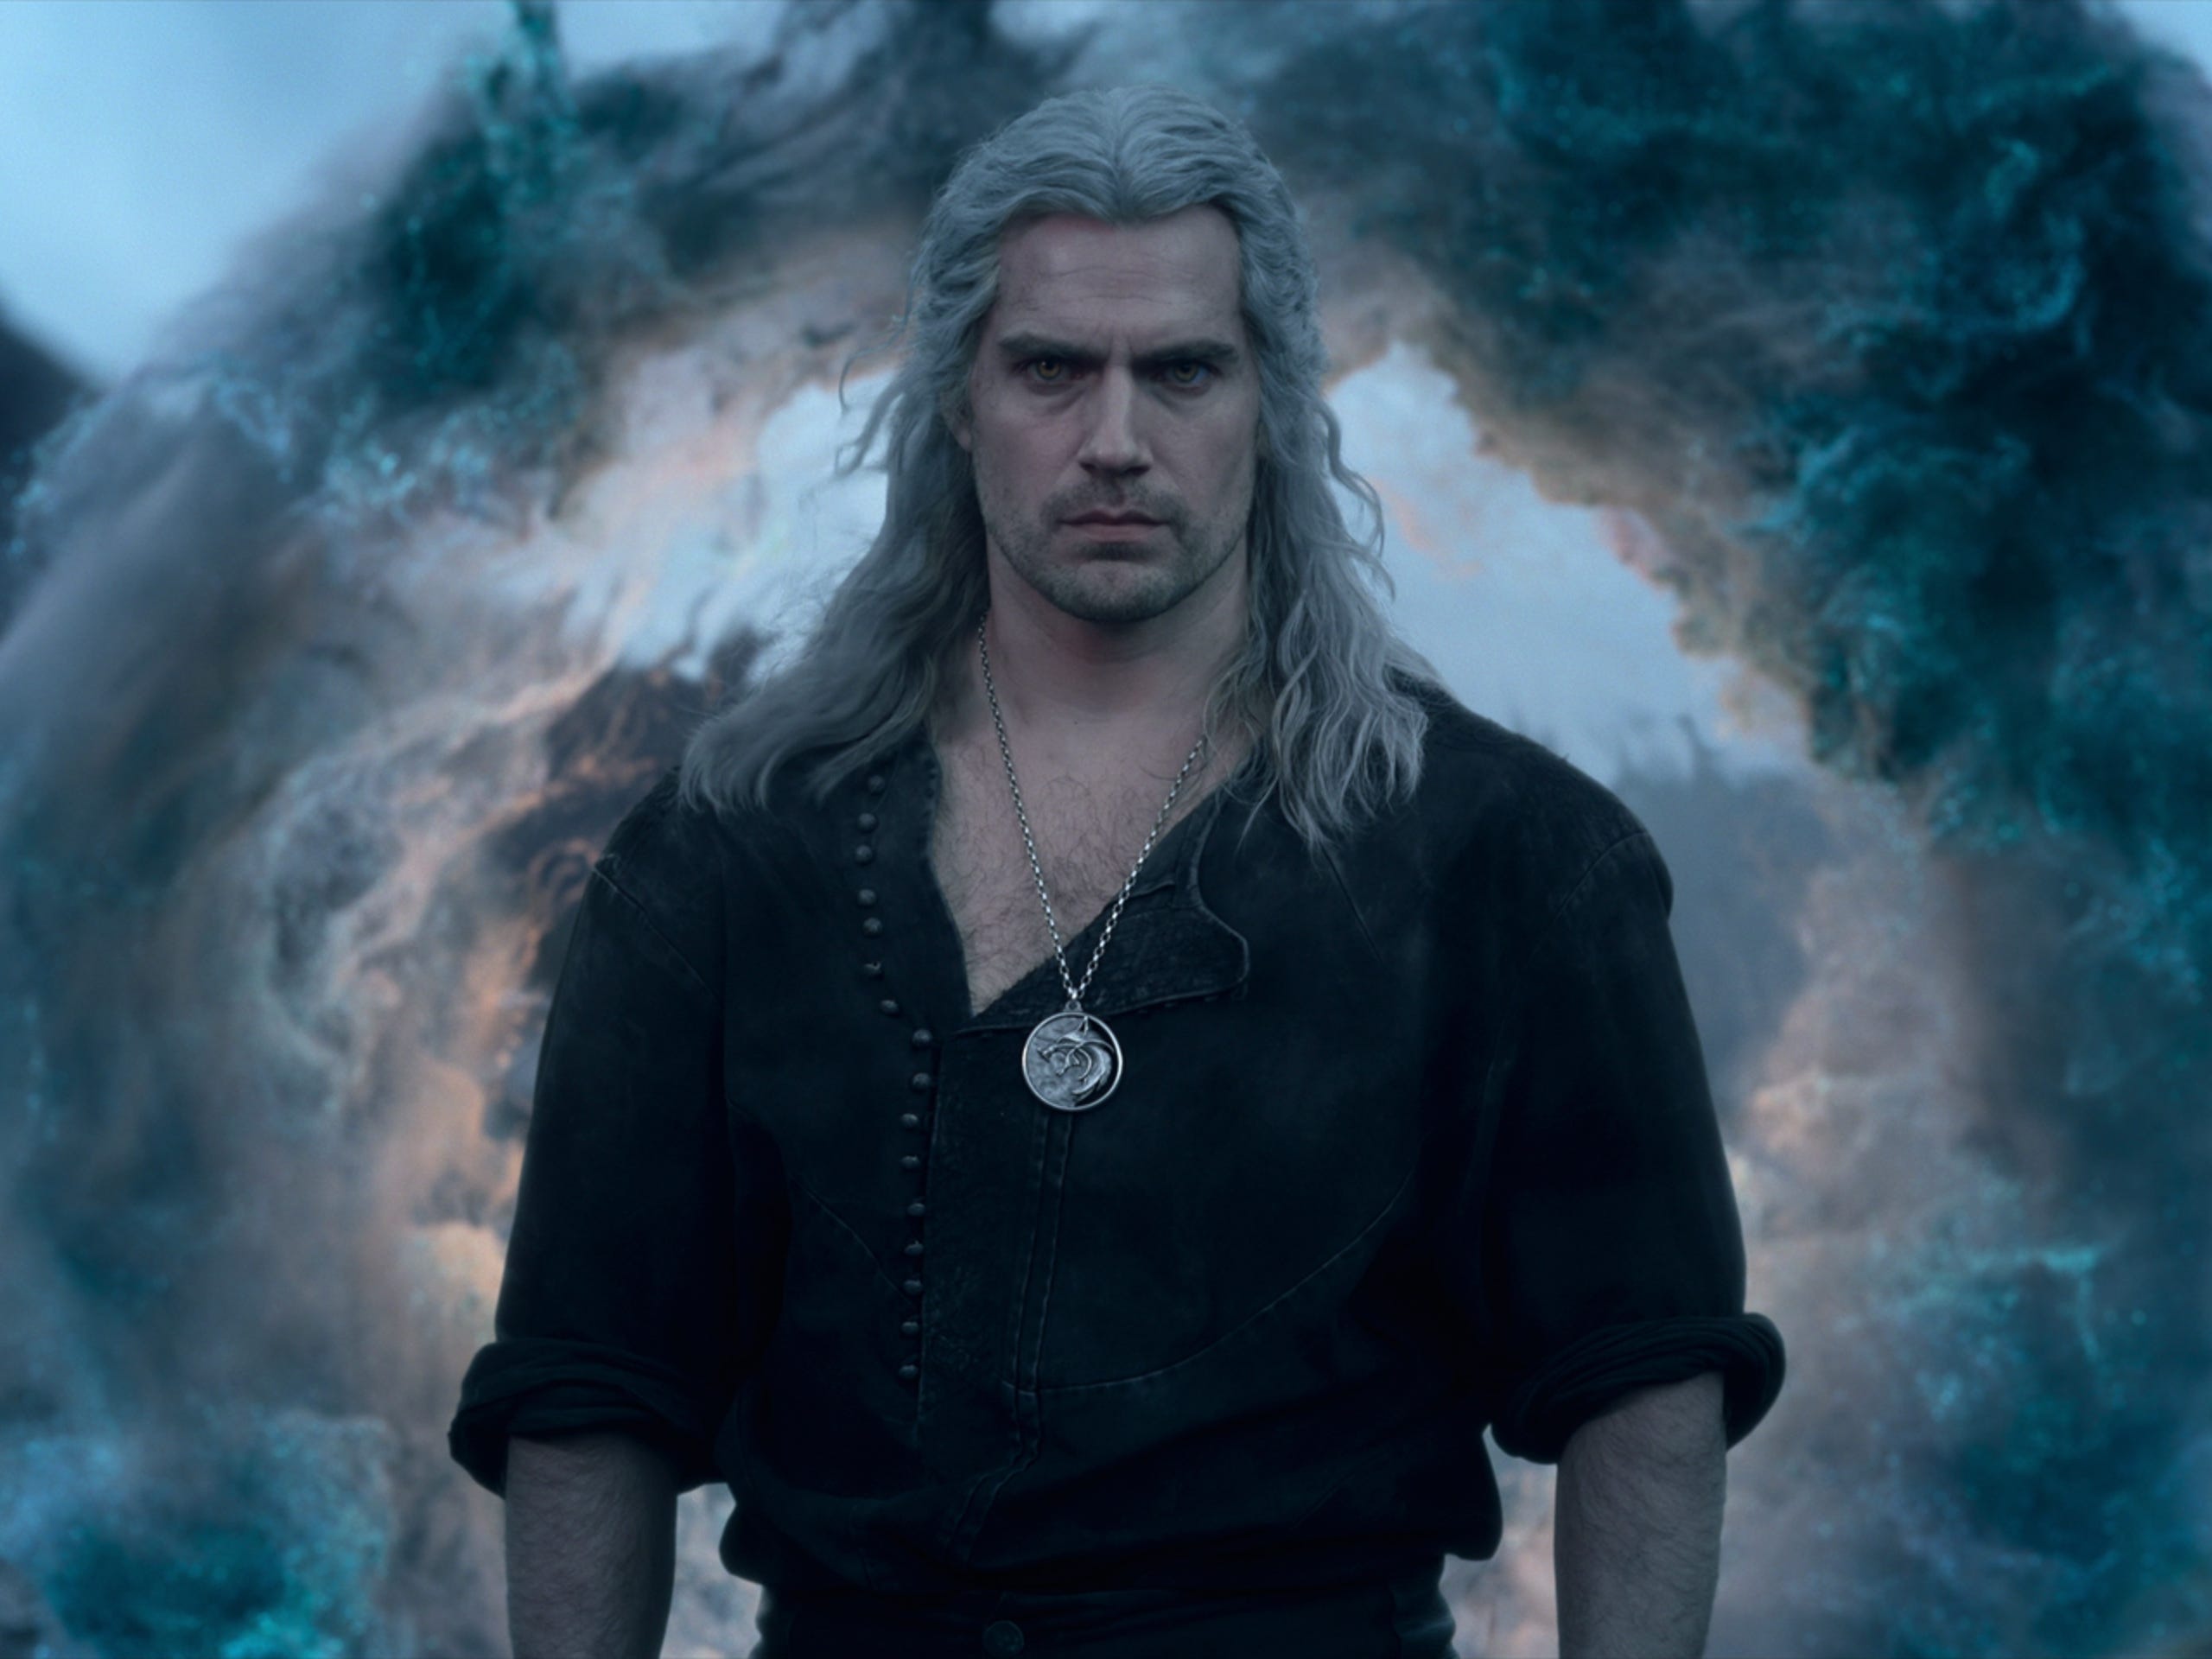 geralt in the witcher, a man with long silver hair and an unbuttoned shirt and silver medallion around his neck. he's standing resolutely in front of a ring of fog